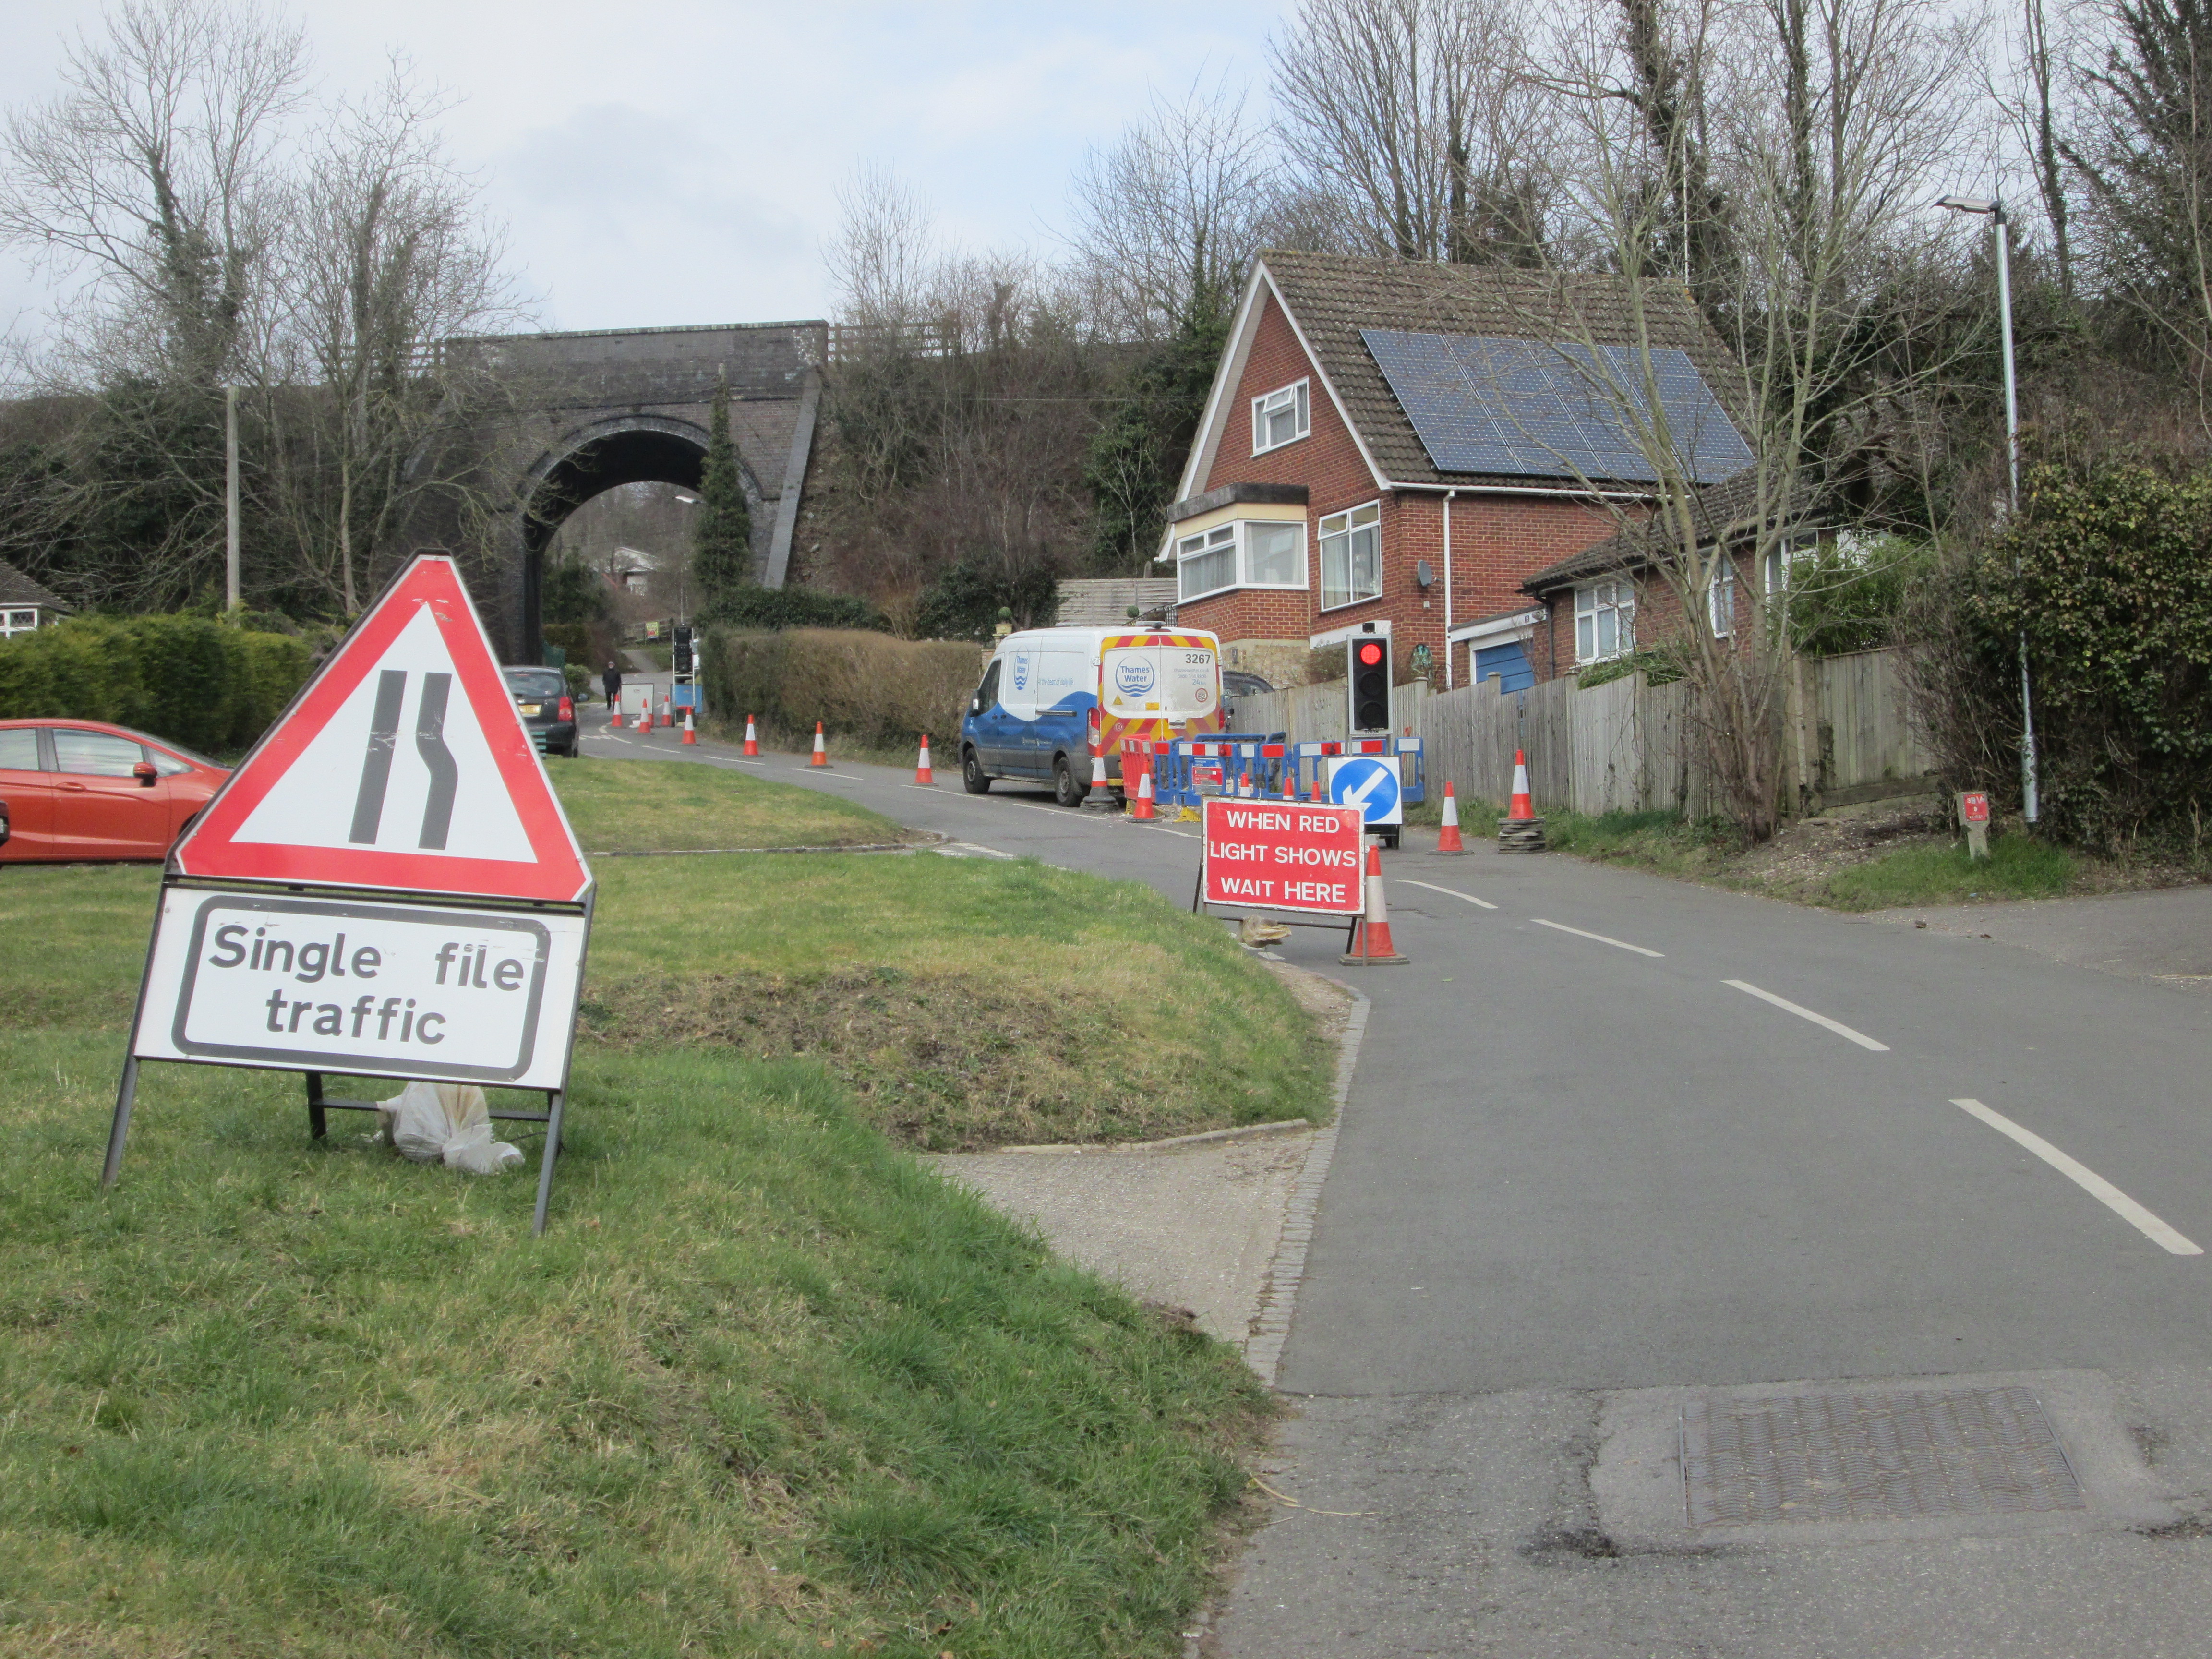 RogerBW's Blog: What is missing from these roadworks?